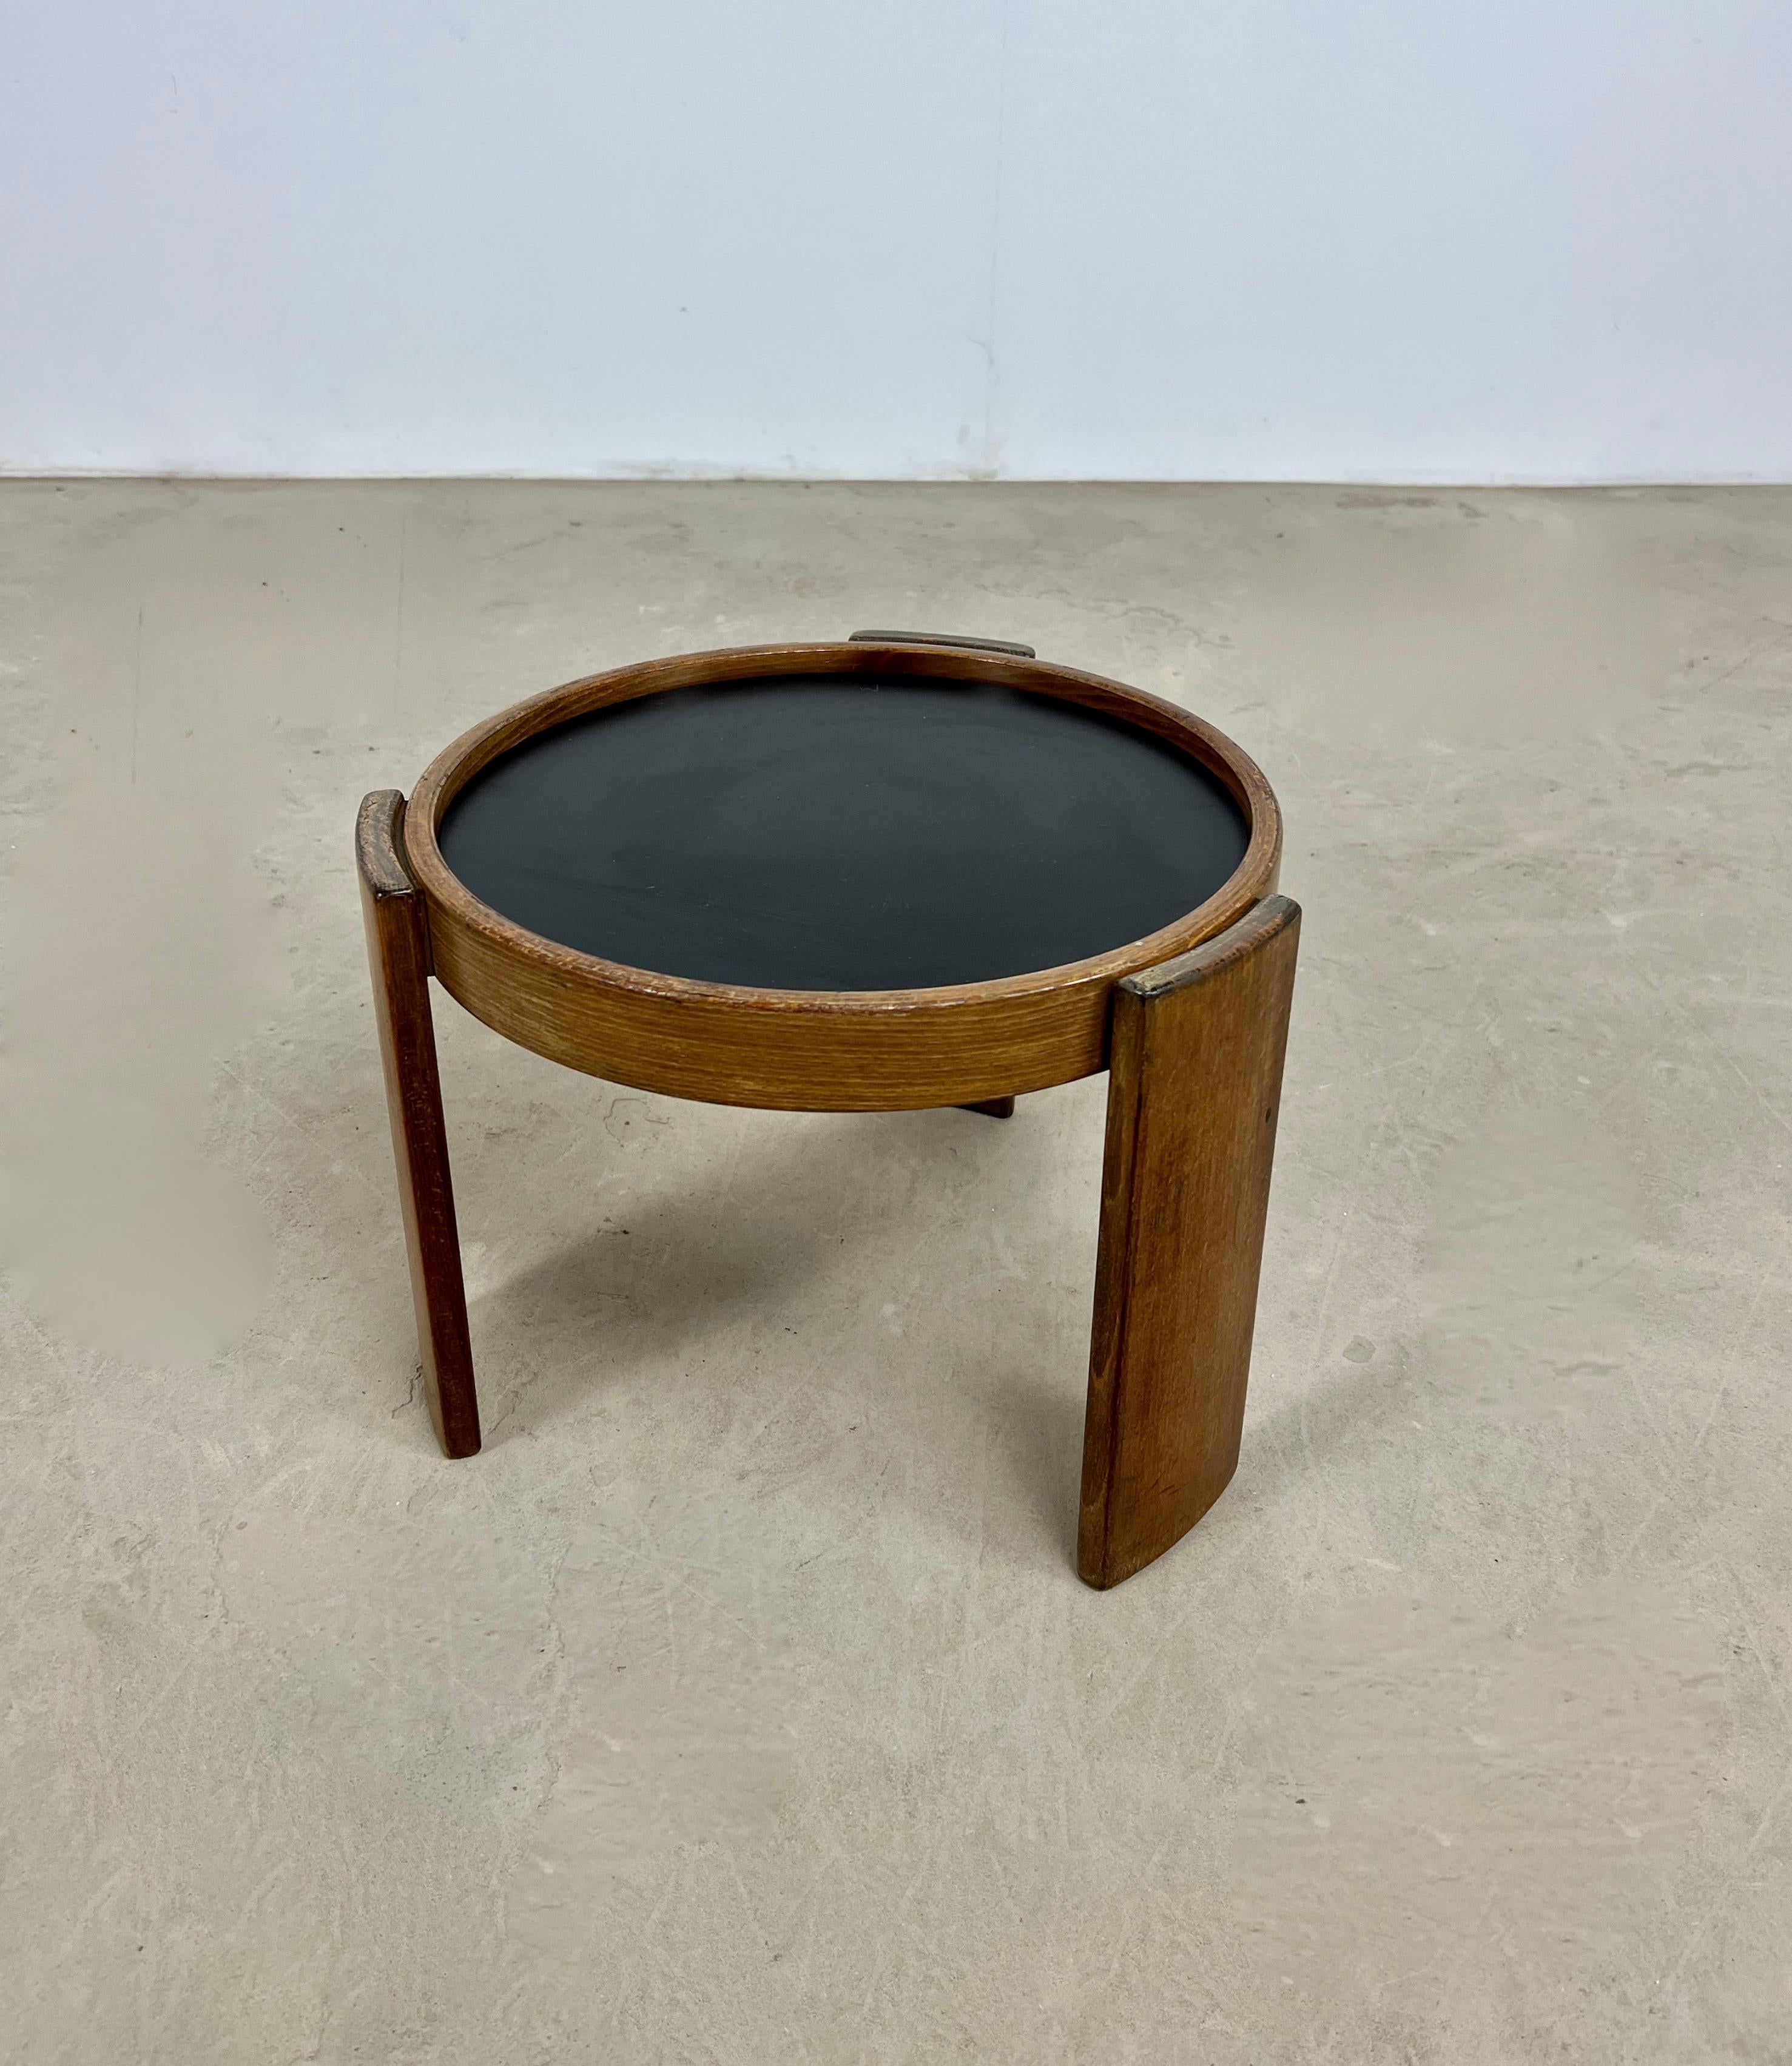 Wooden table. Reversible black and white table top. Wear due to time and age of the table.